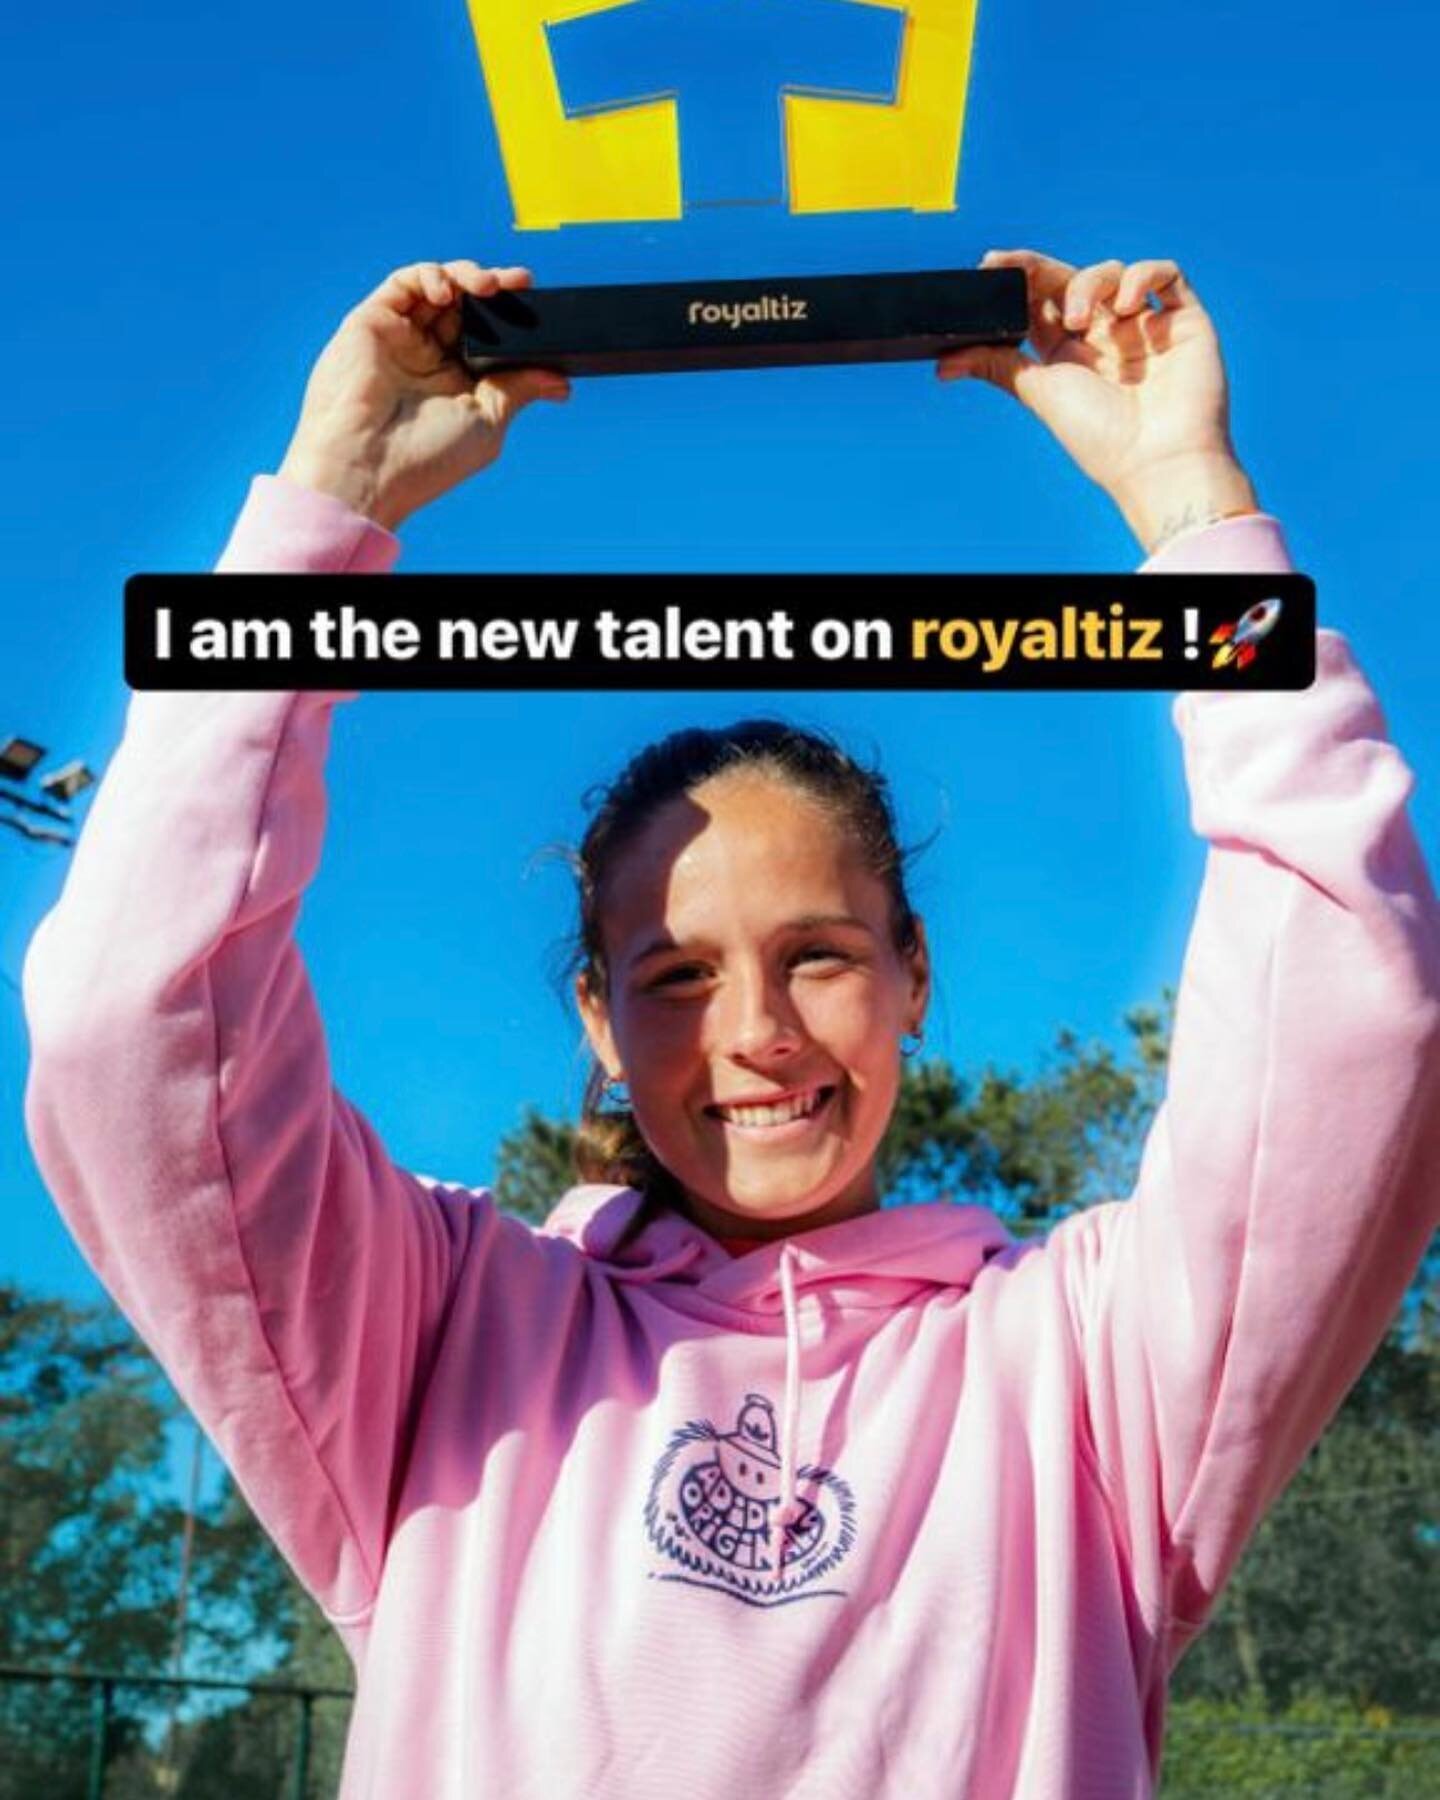 Introducing a new partnership between @kasatkina and @royaltiz_off 

Here is your change to invest in Dasha&rsquo;s career by buying Royaltiz, check out the Royaltiz website www.Royaltiz.com to find out everything you need to know!

#Kasatkina #Daria